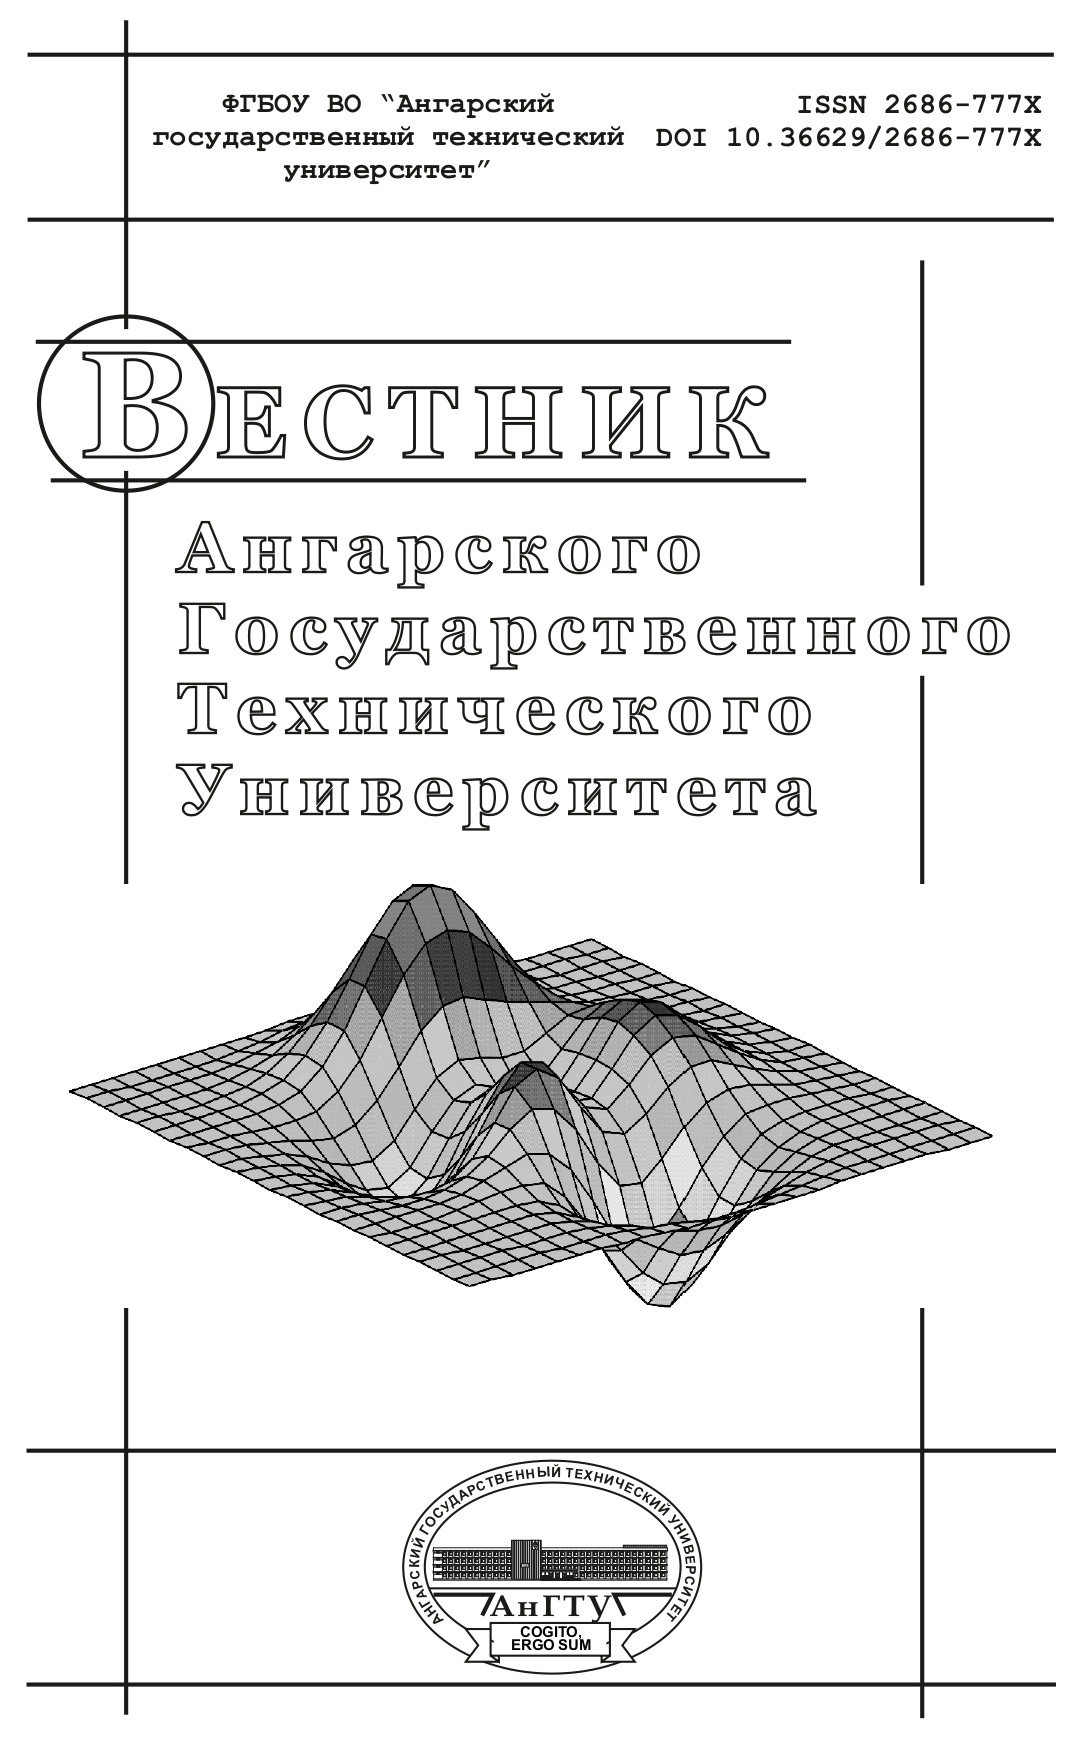                         Bulletin of the Angarsk State Technical University
            